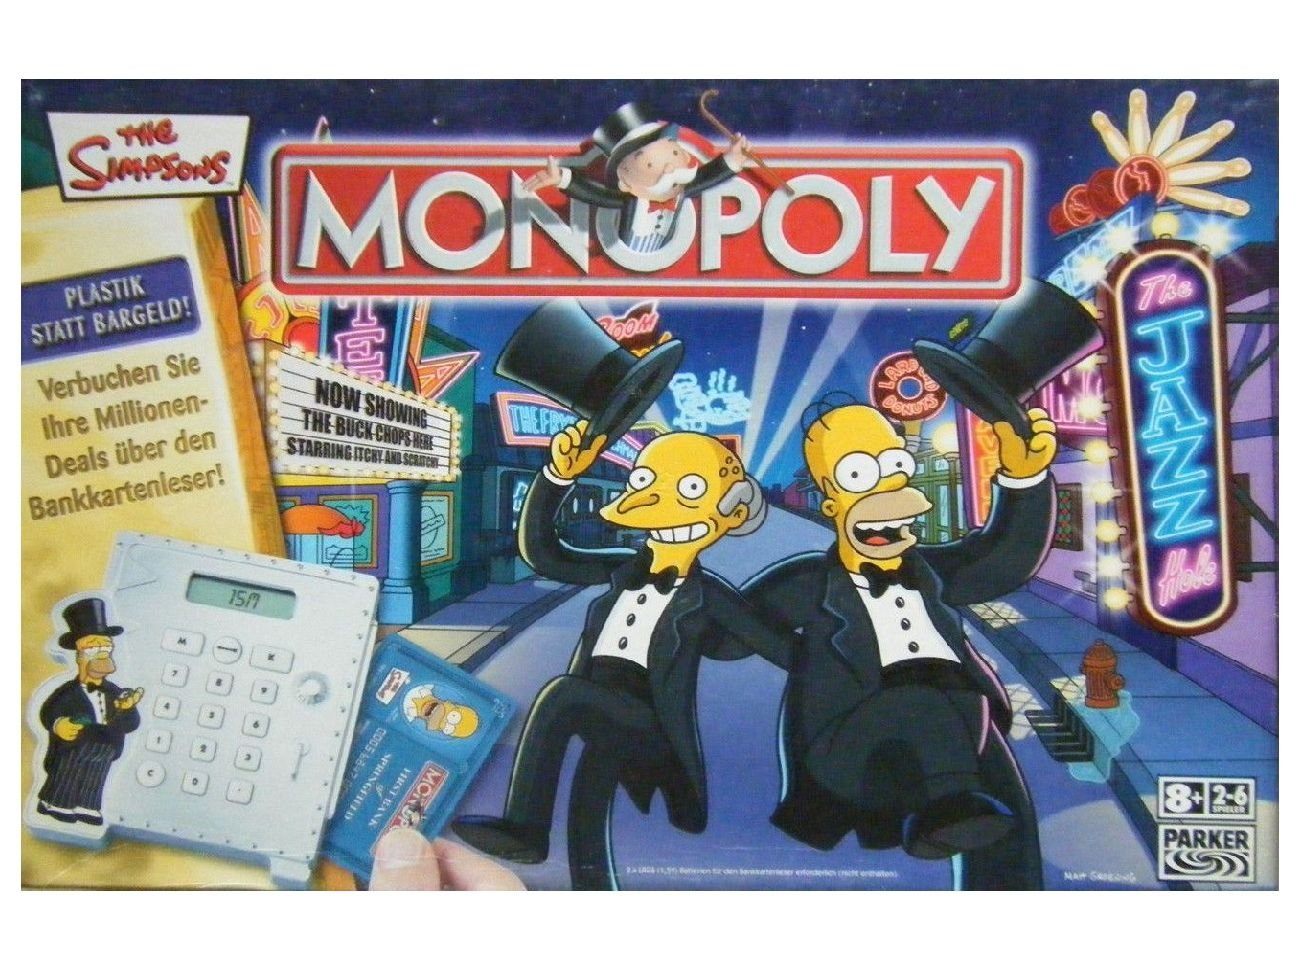 Order Monopoly: The Simpsons at Amazon